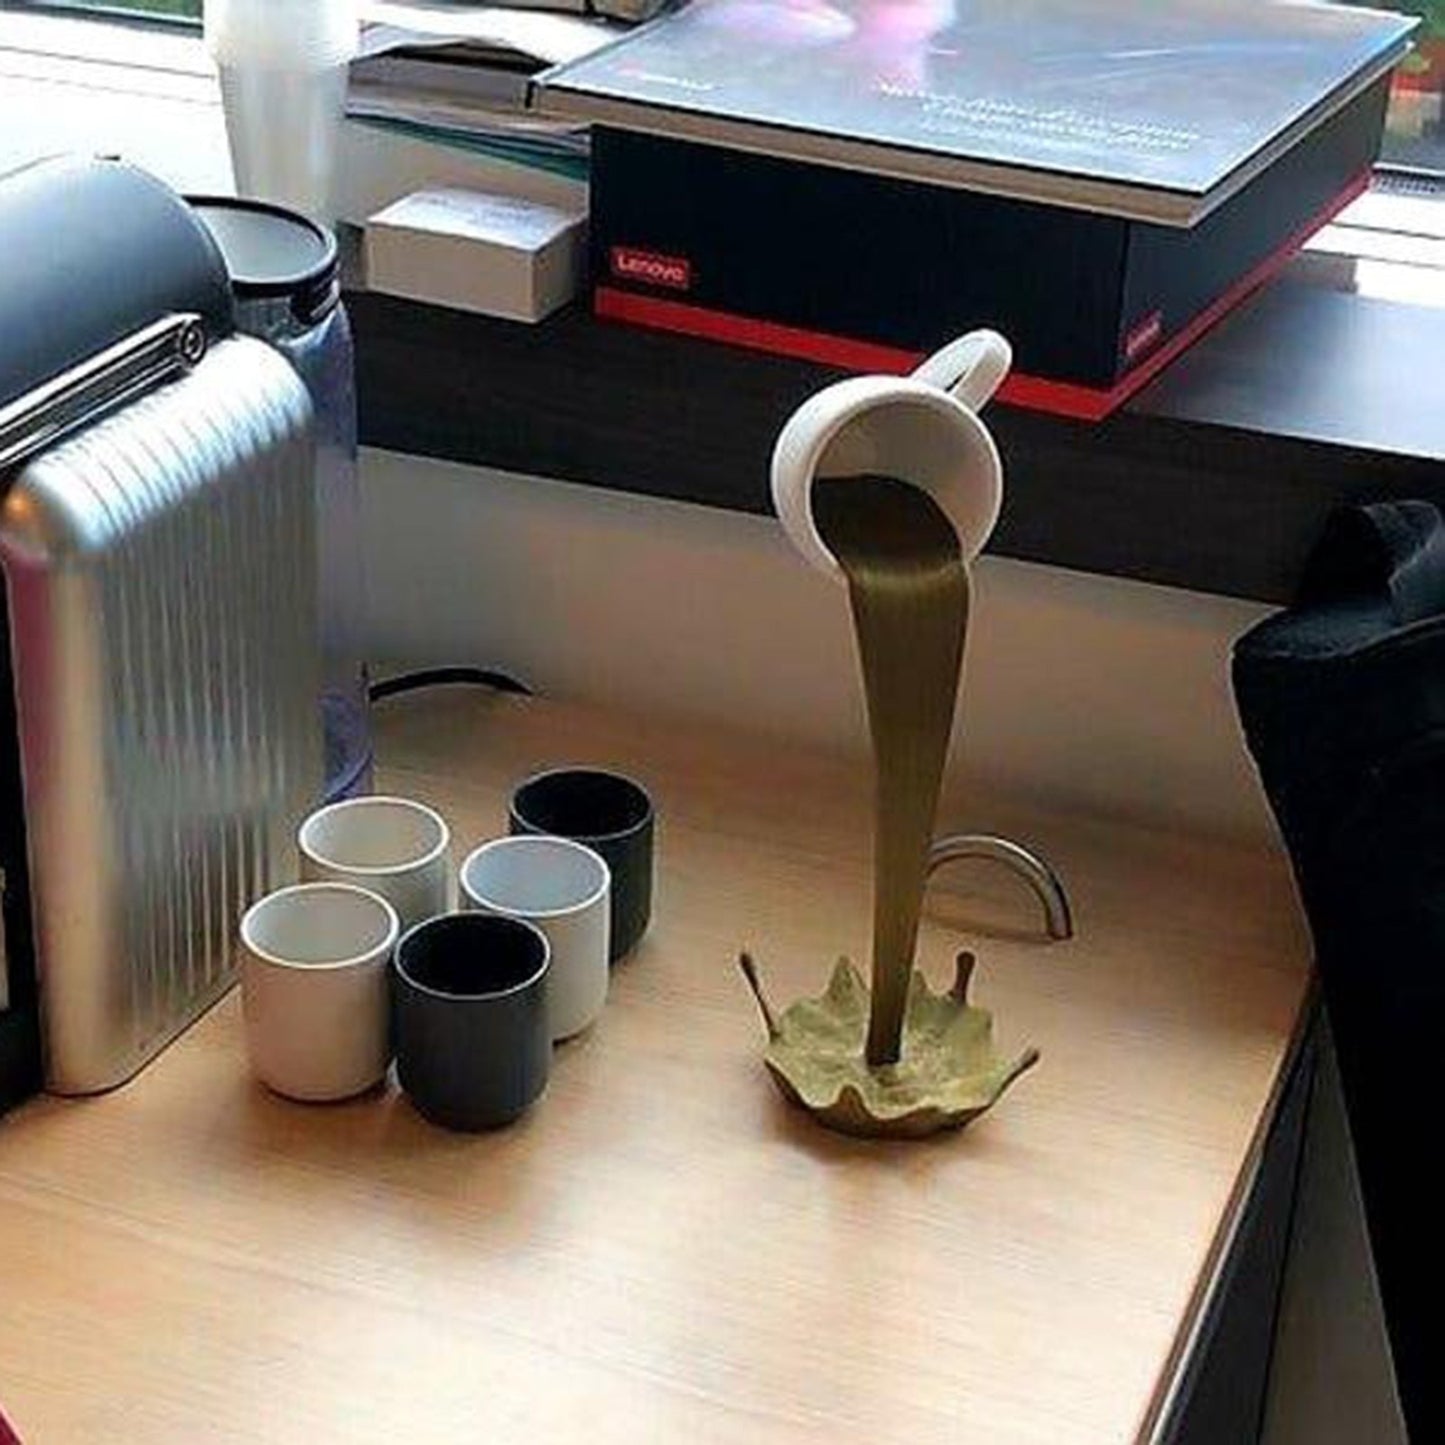 Original Floating Spilling Coffee Cup Sculpture